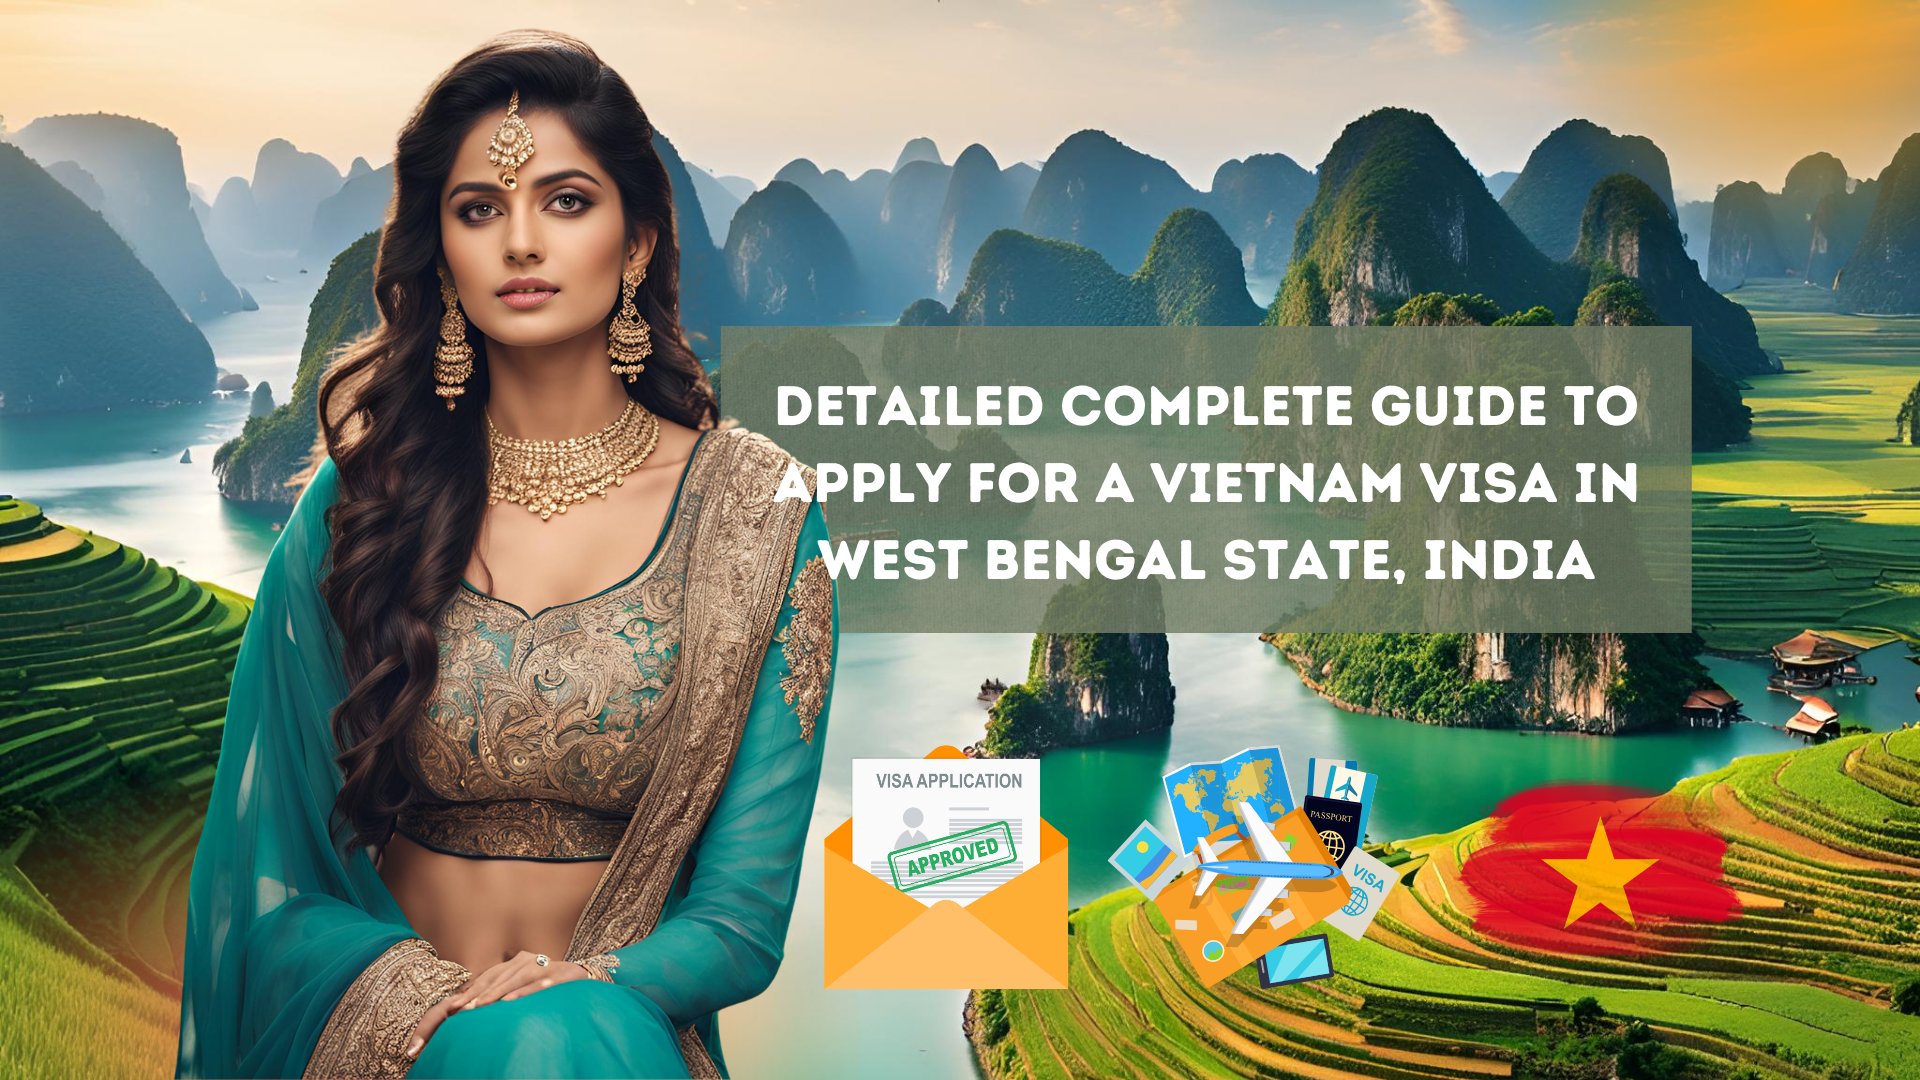 Detailed Complete Guide to Apply for a Vietnam Visa in West Bengal State, India